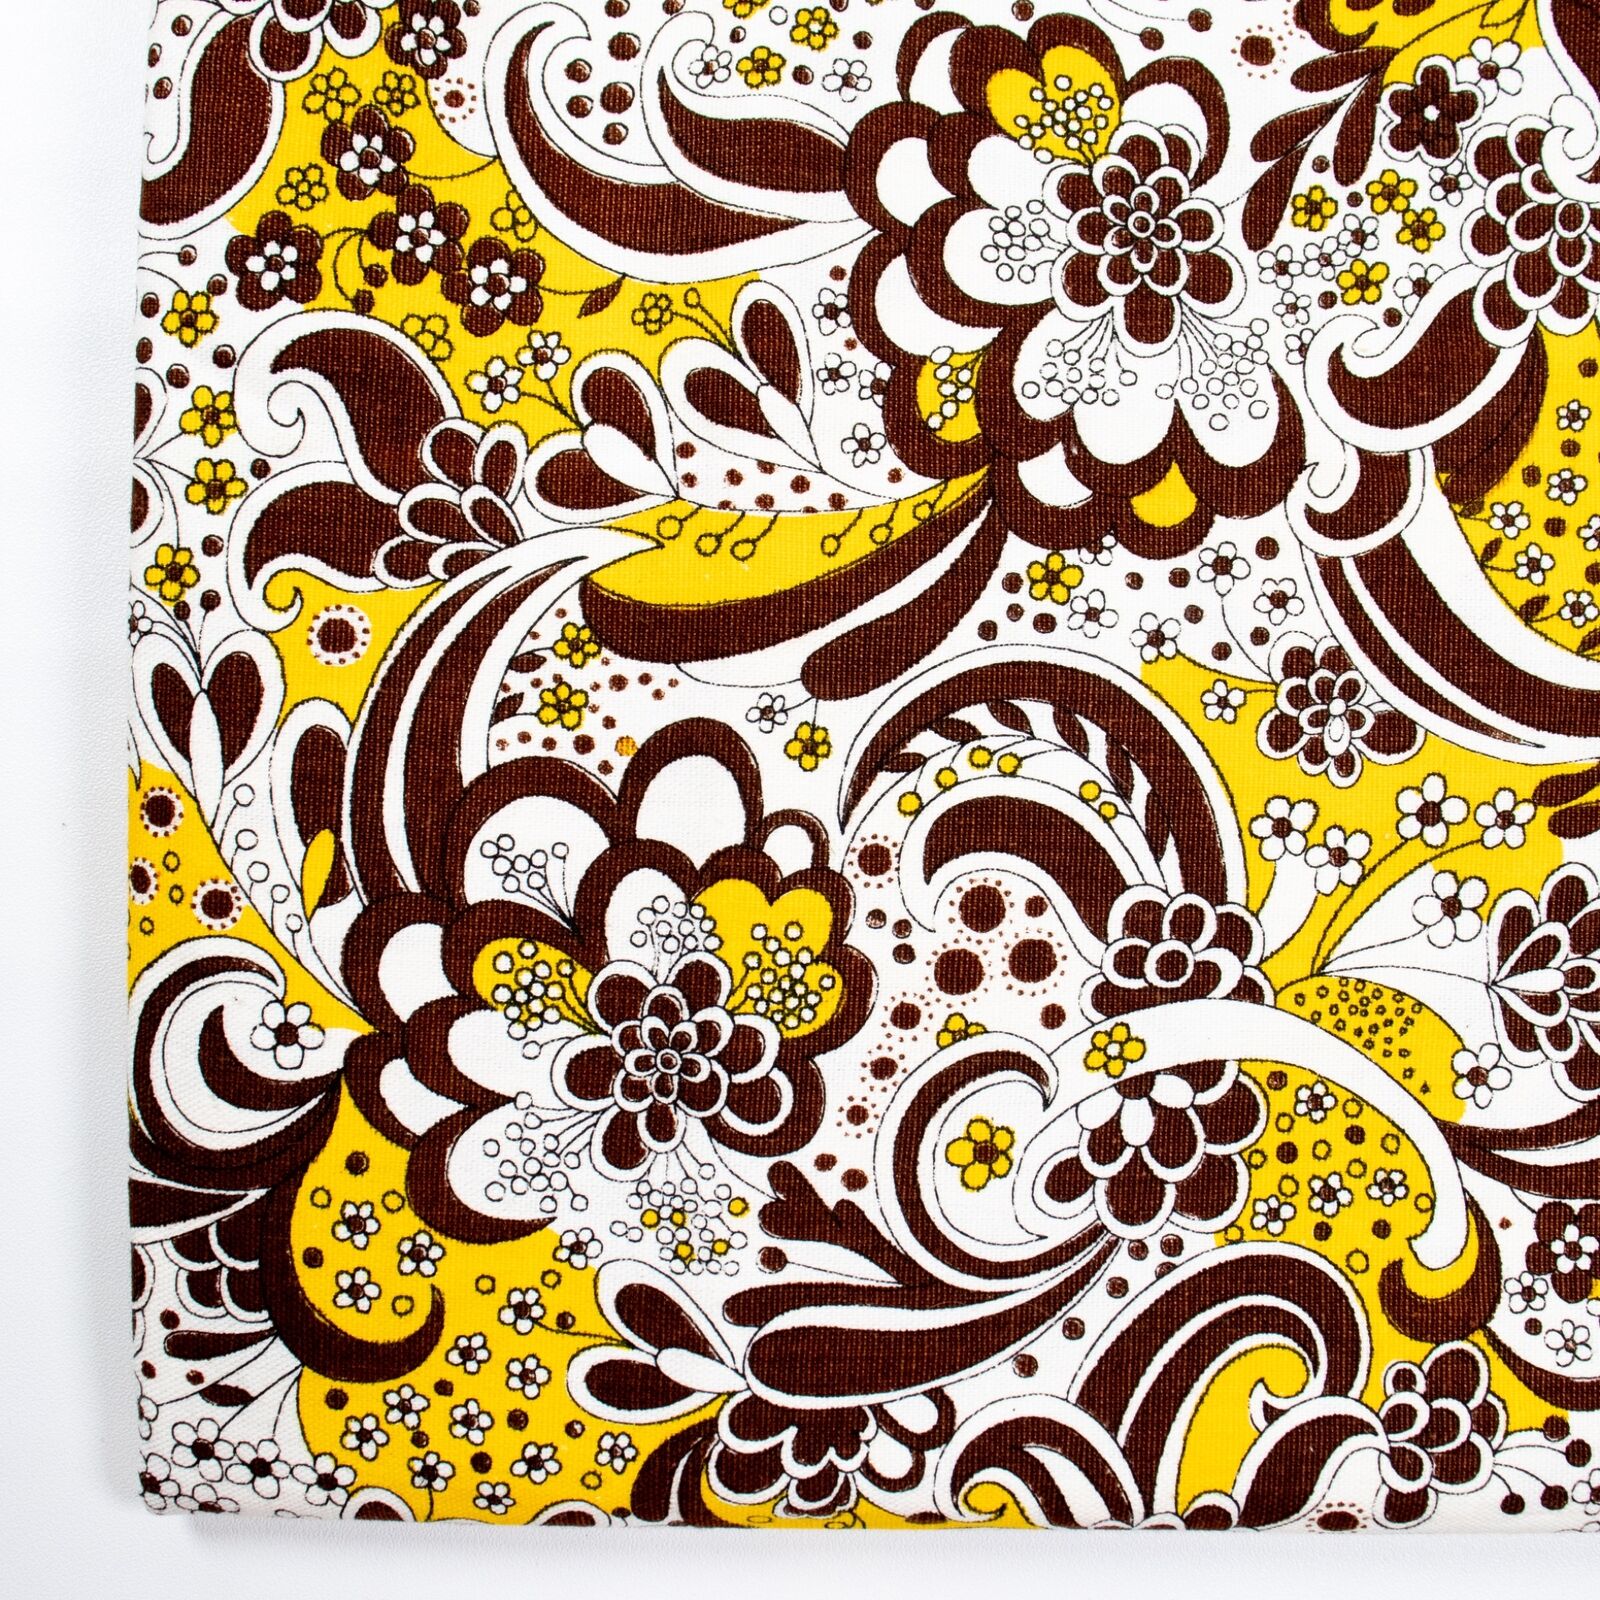 Vtg Cotton Fabric Funky Flower Power Yellow Brown Floral 1970s Groovy Paisley